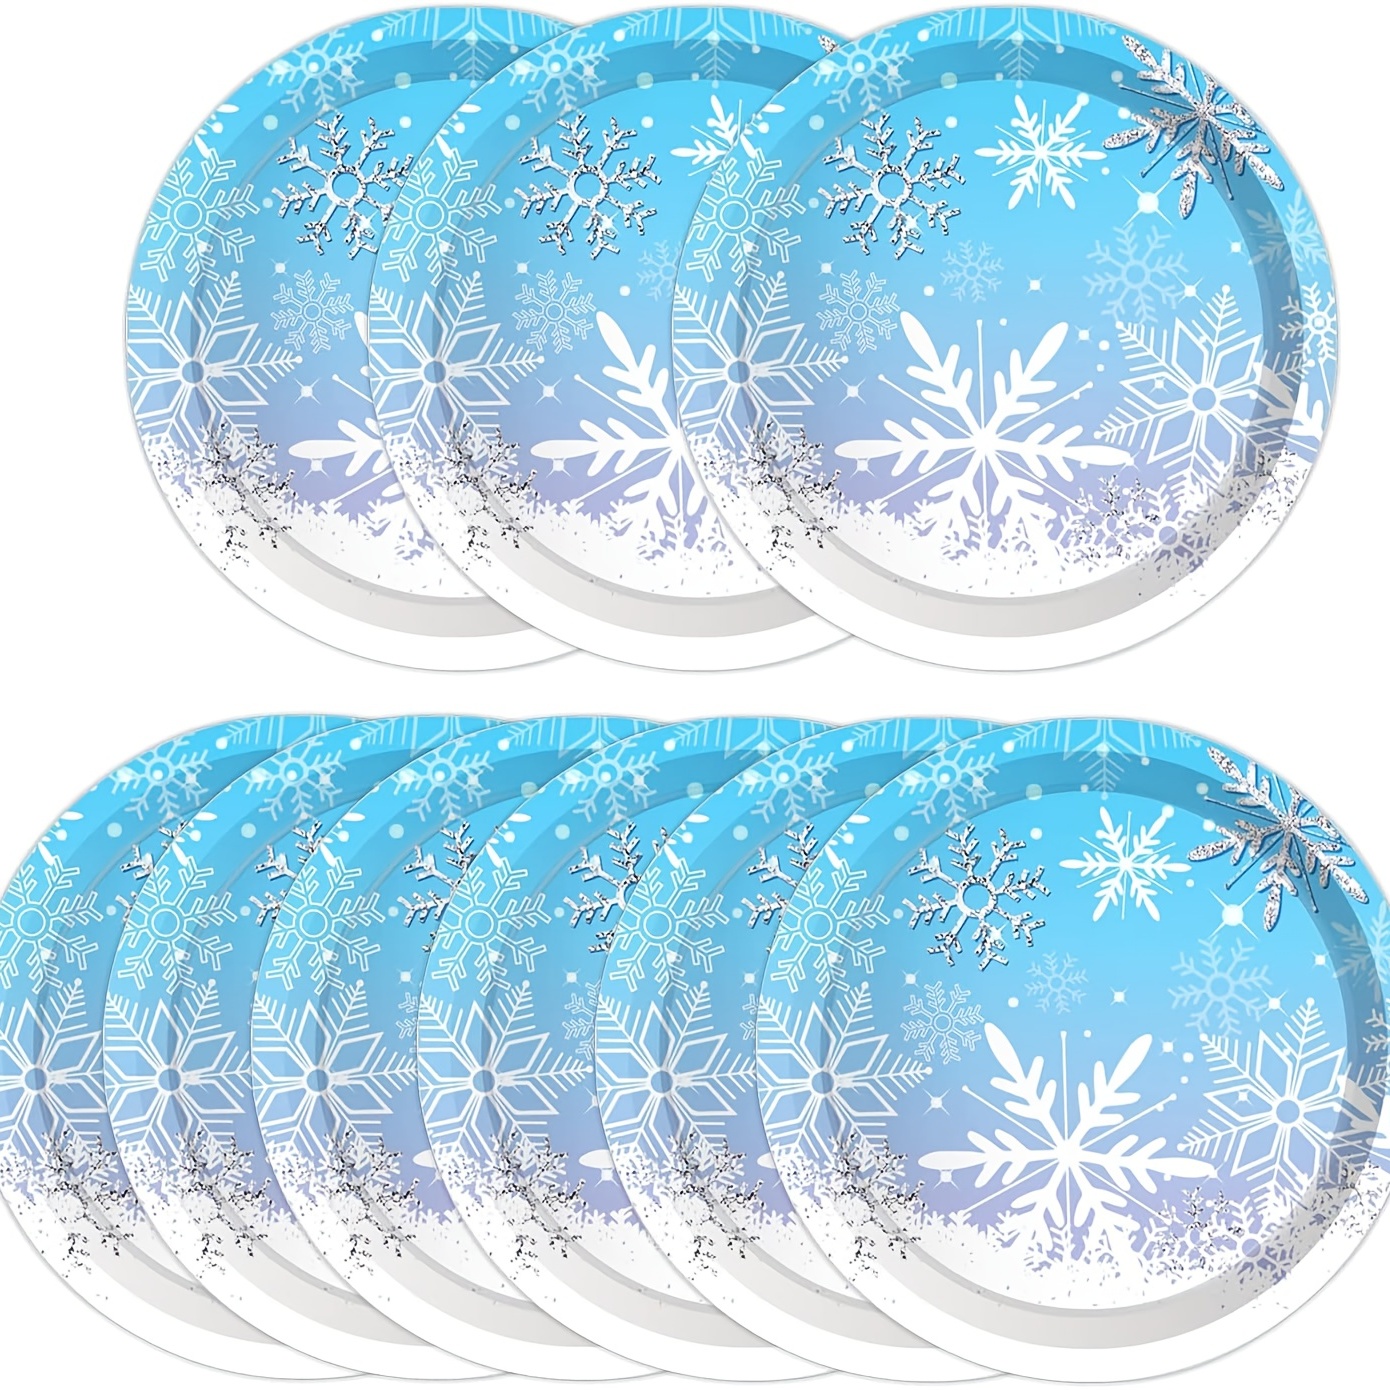 Winter Snowflake Party Plates Perfect For Christmas, Holiday  Celebrations, Baby Showers, Weddings, Bridal Showers, And New Year's Eve  Disposable Paper Plates In Blue And White Festive And Elegant Party